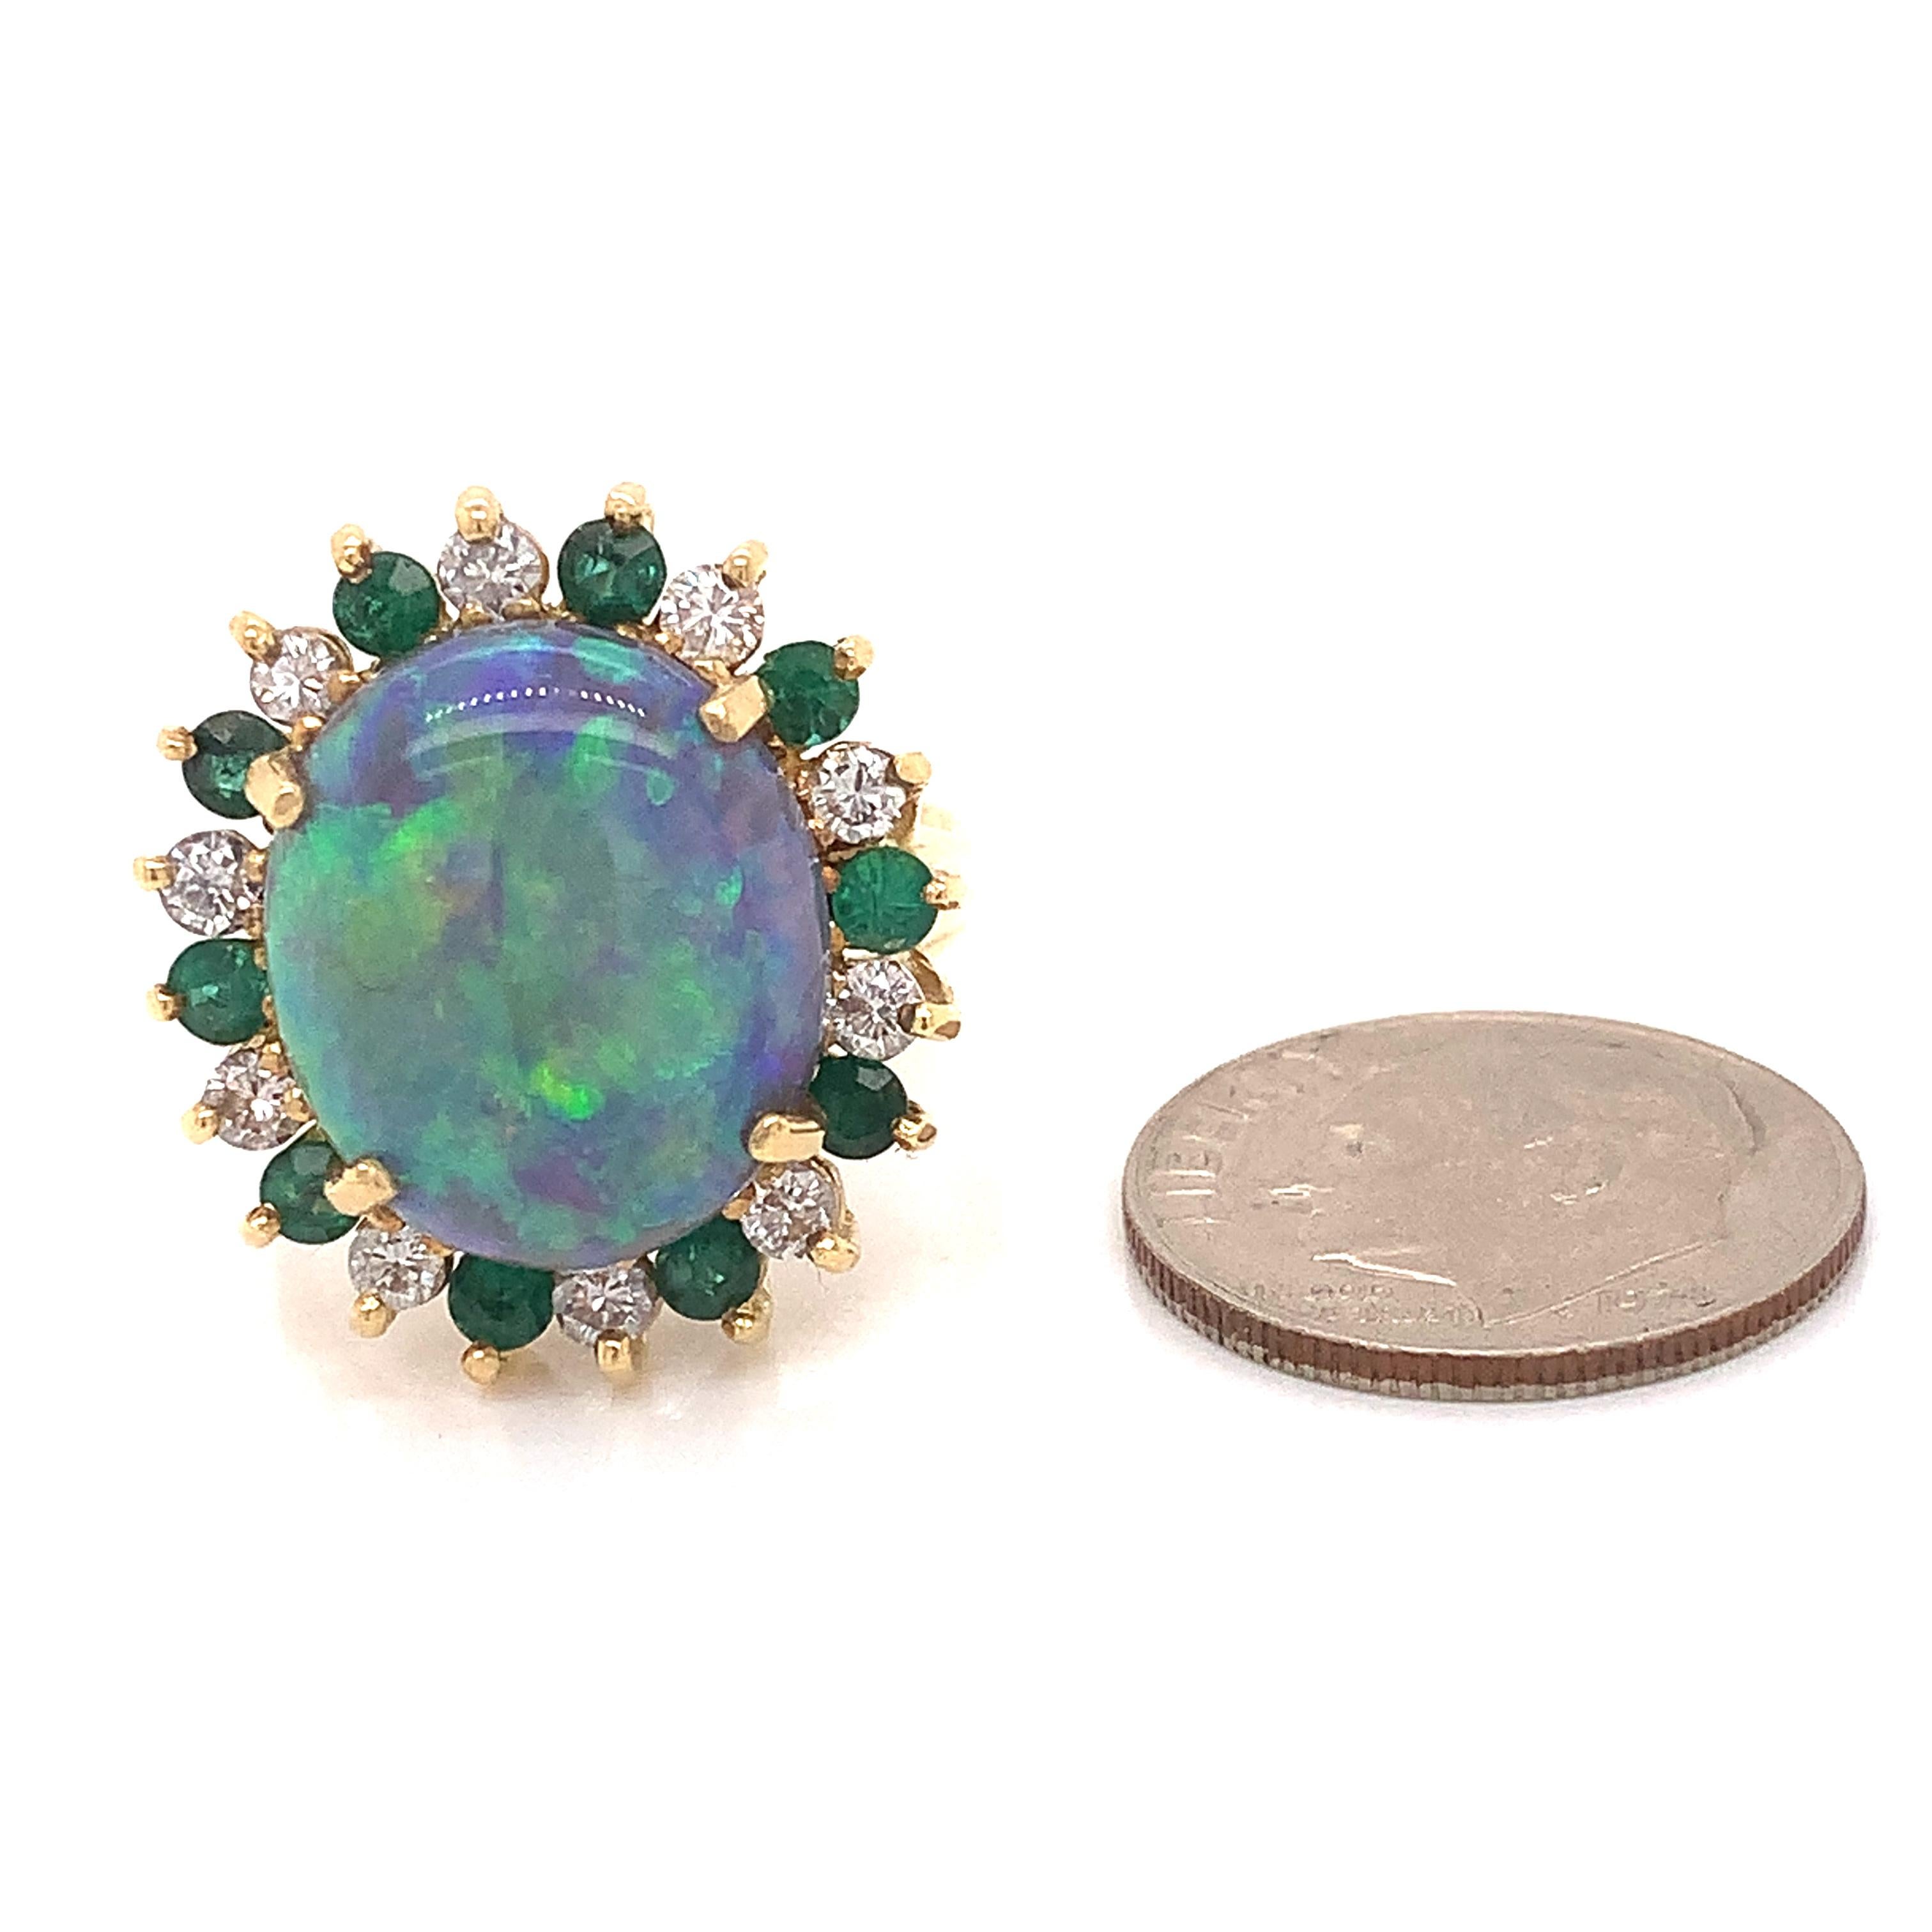 black opal and emerald ring